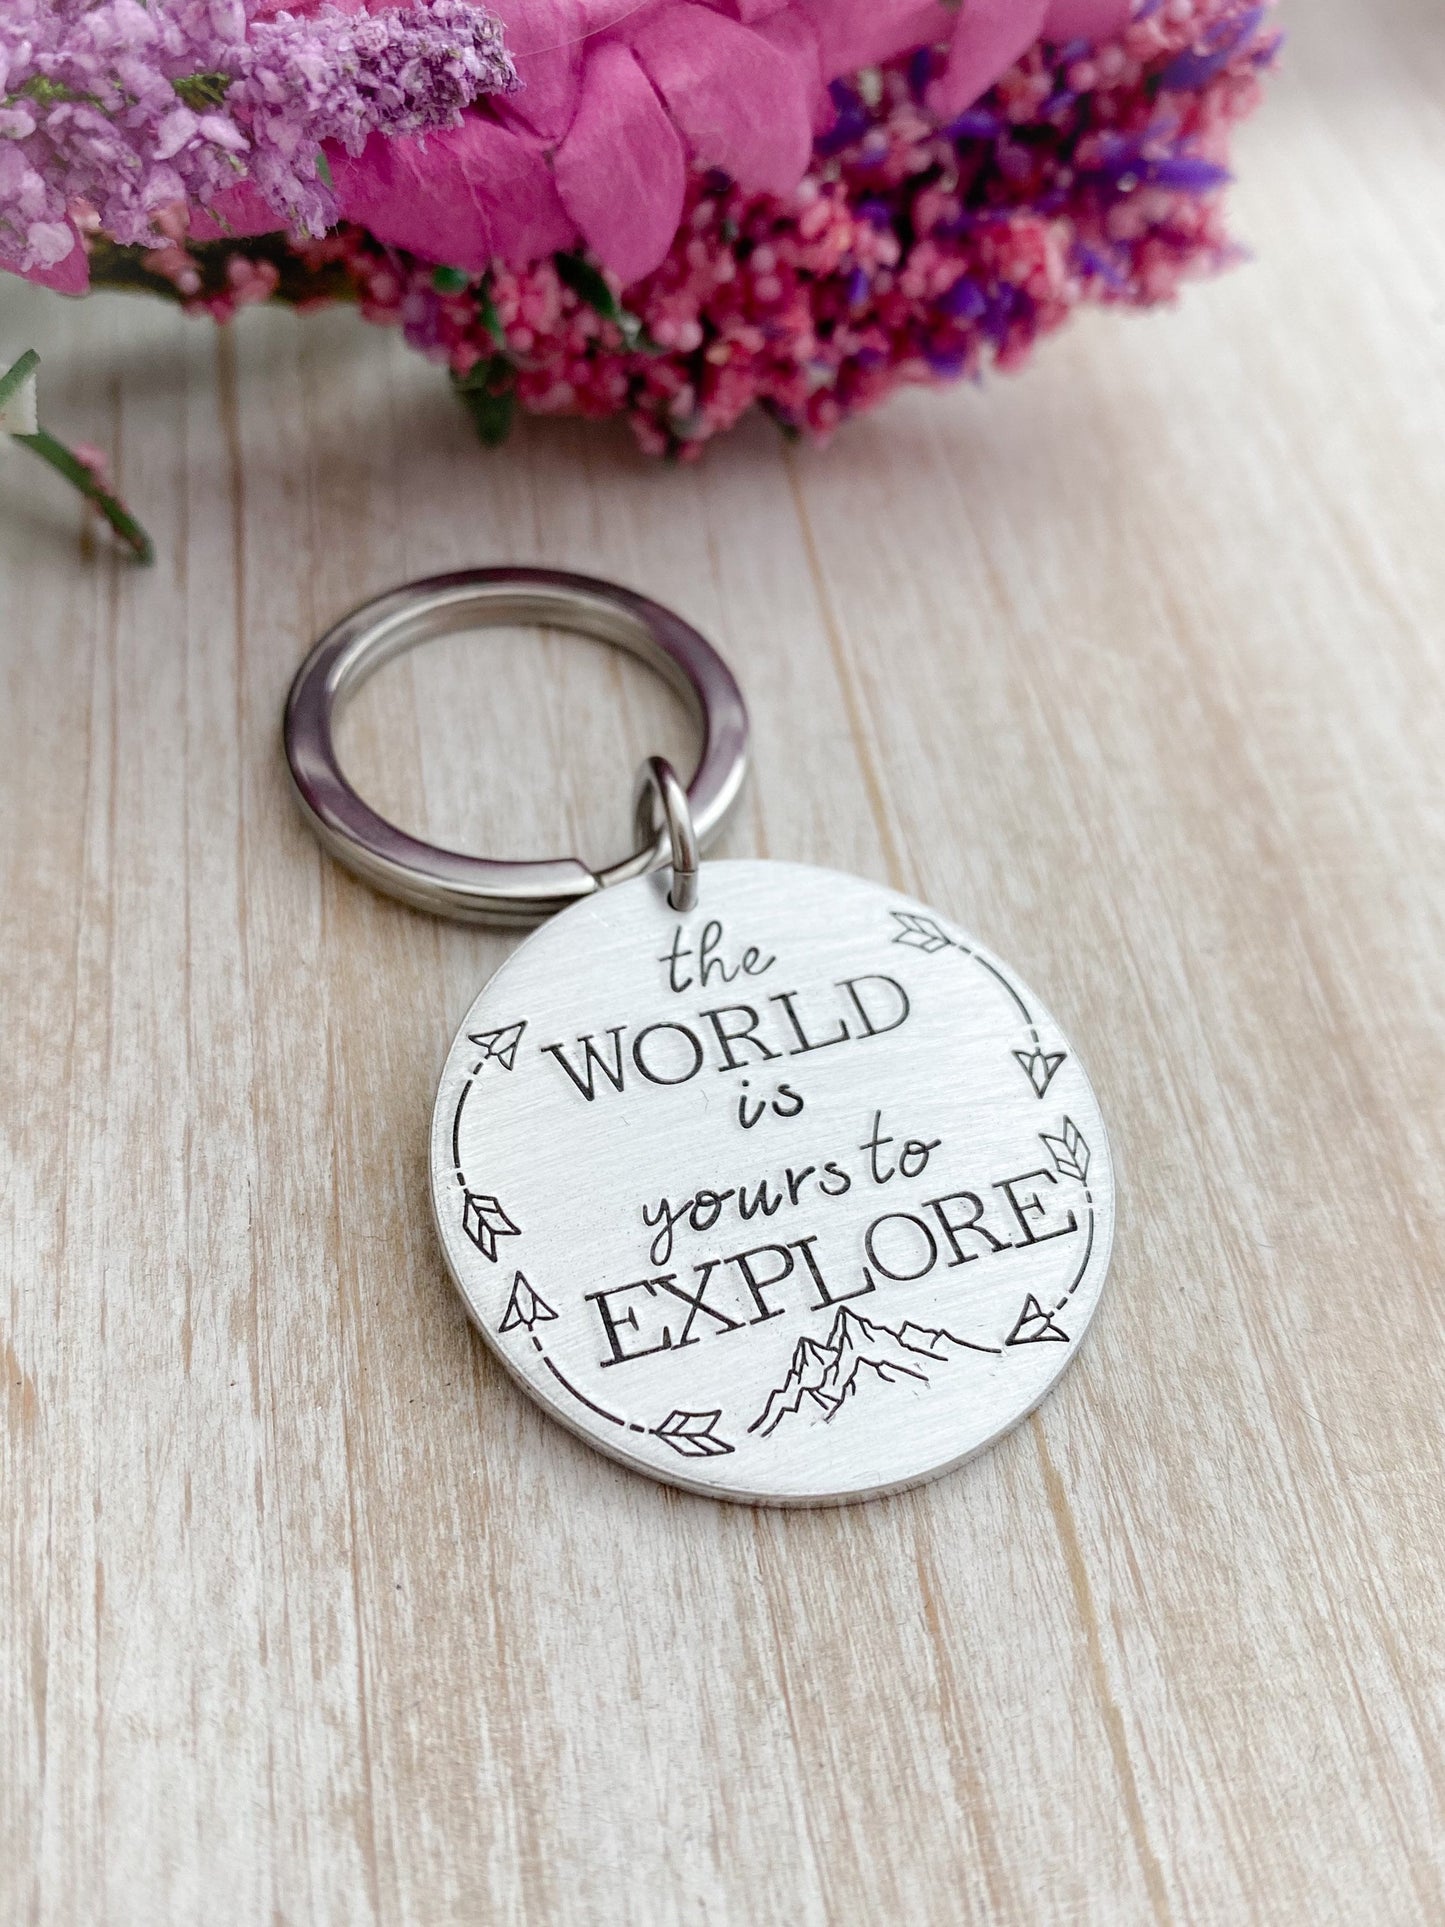 The World is Yours to Explore Keychain--New Driver--Graduation Gift--Mountain Keychain--Hand Stamped Key Chain--World Traveler Gift